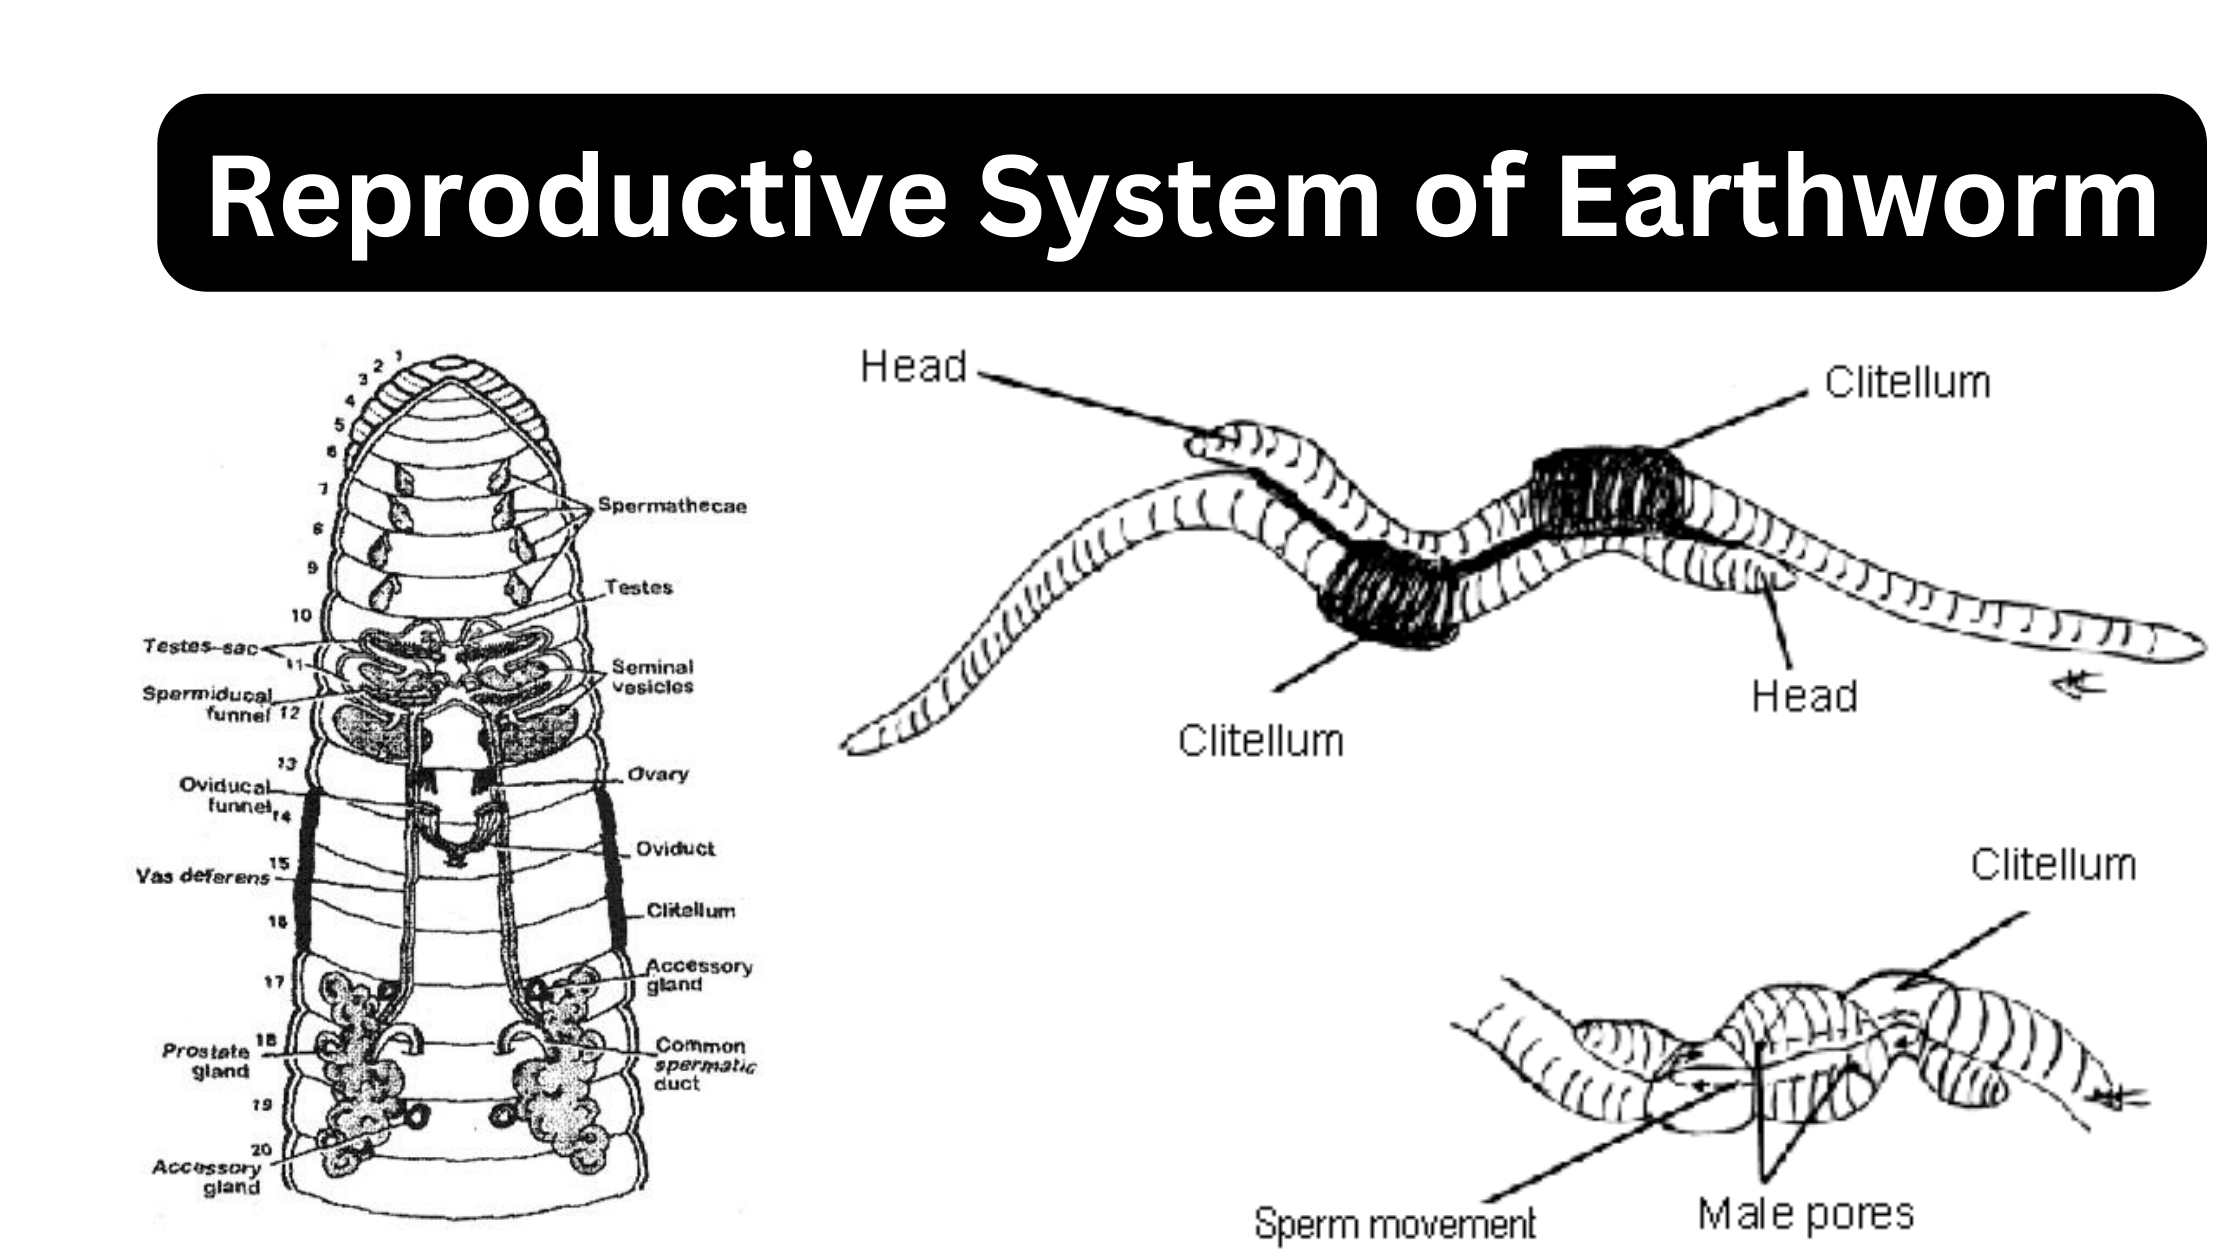 Reproductive System of Earthworm